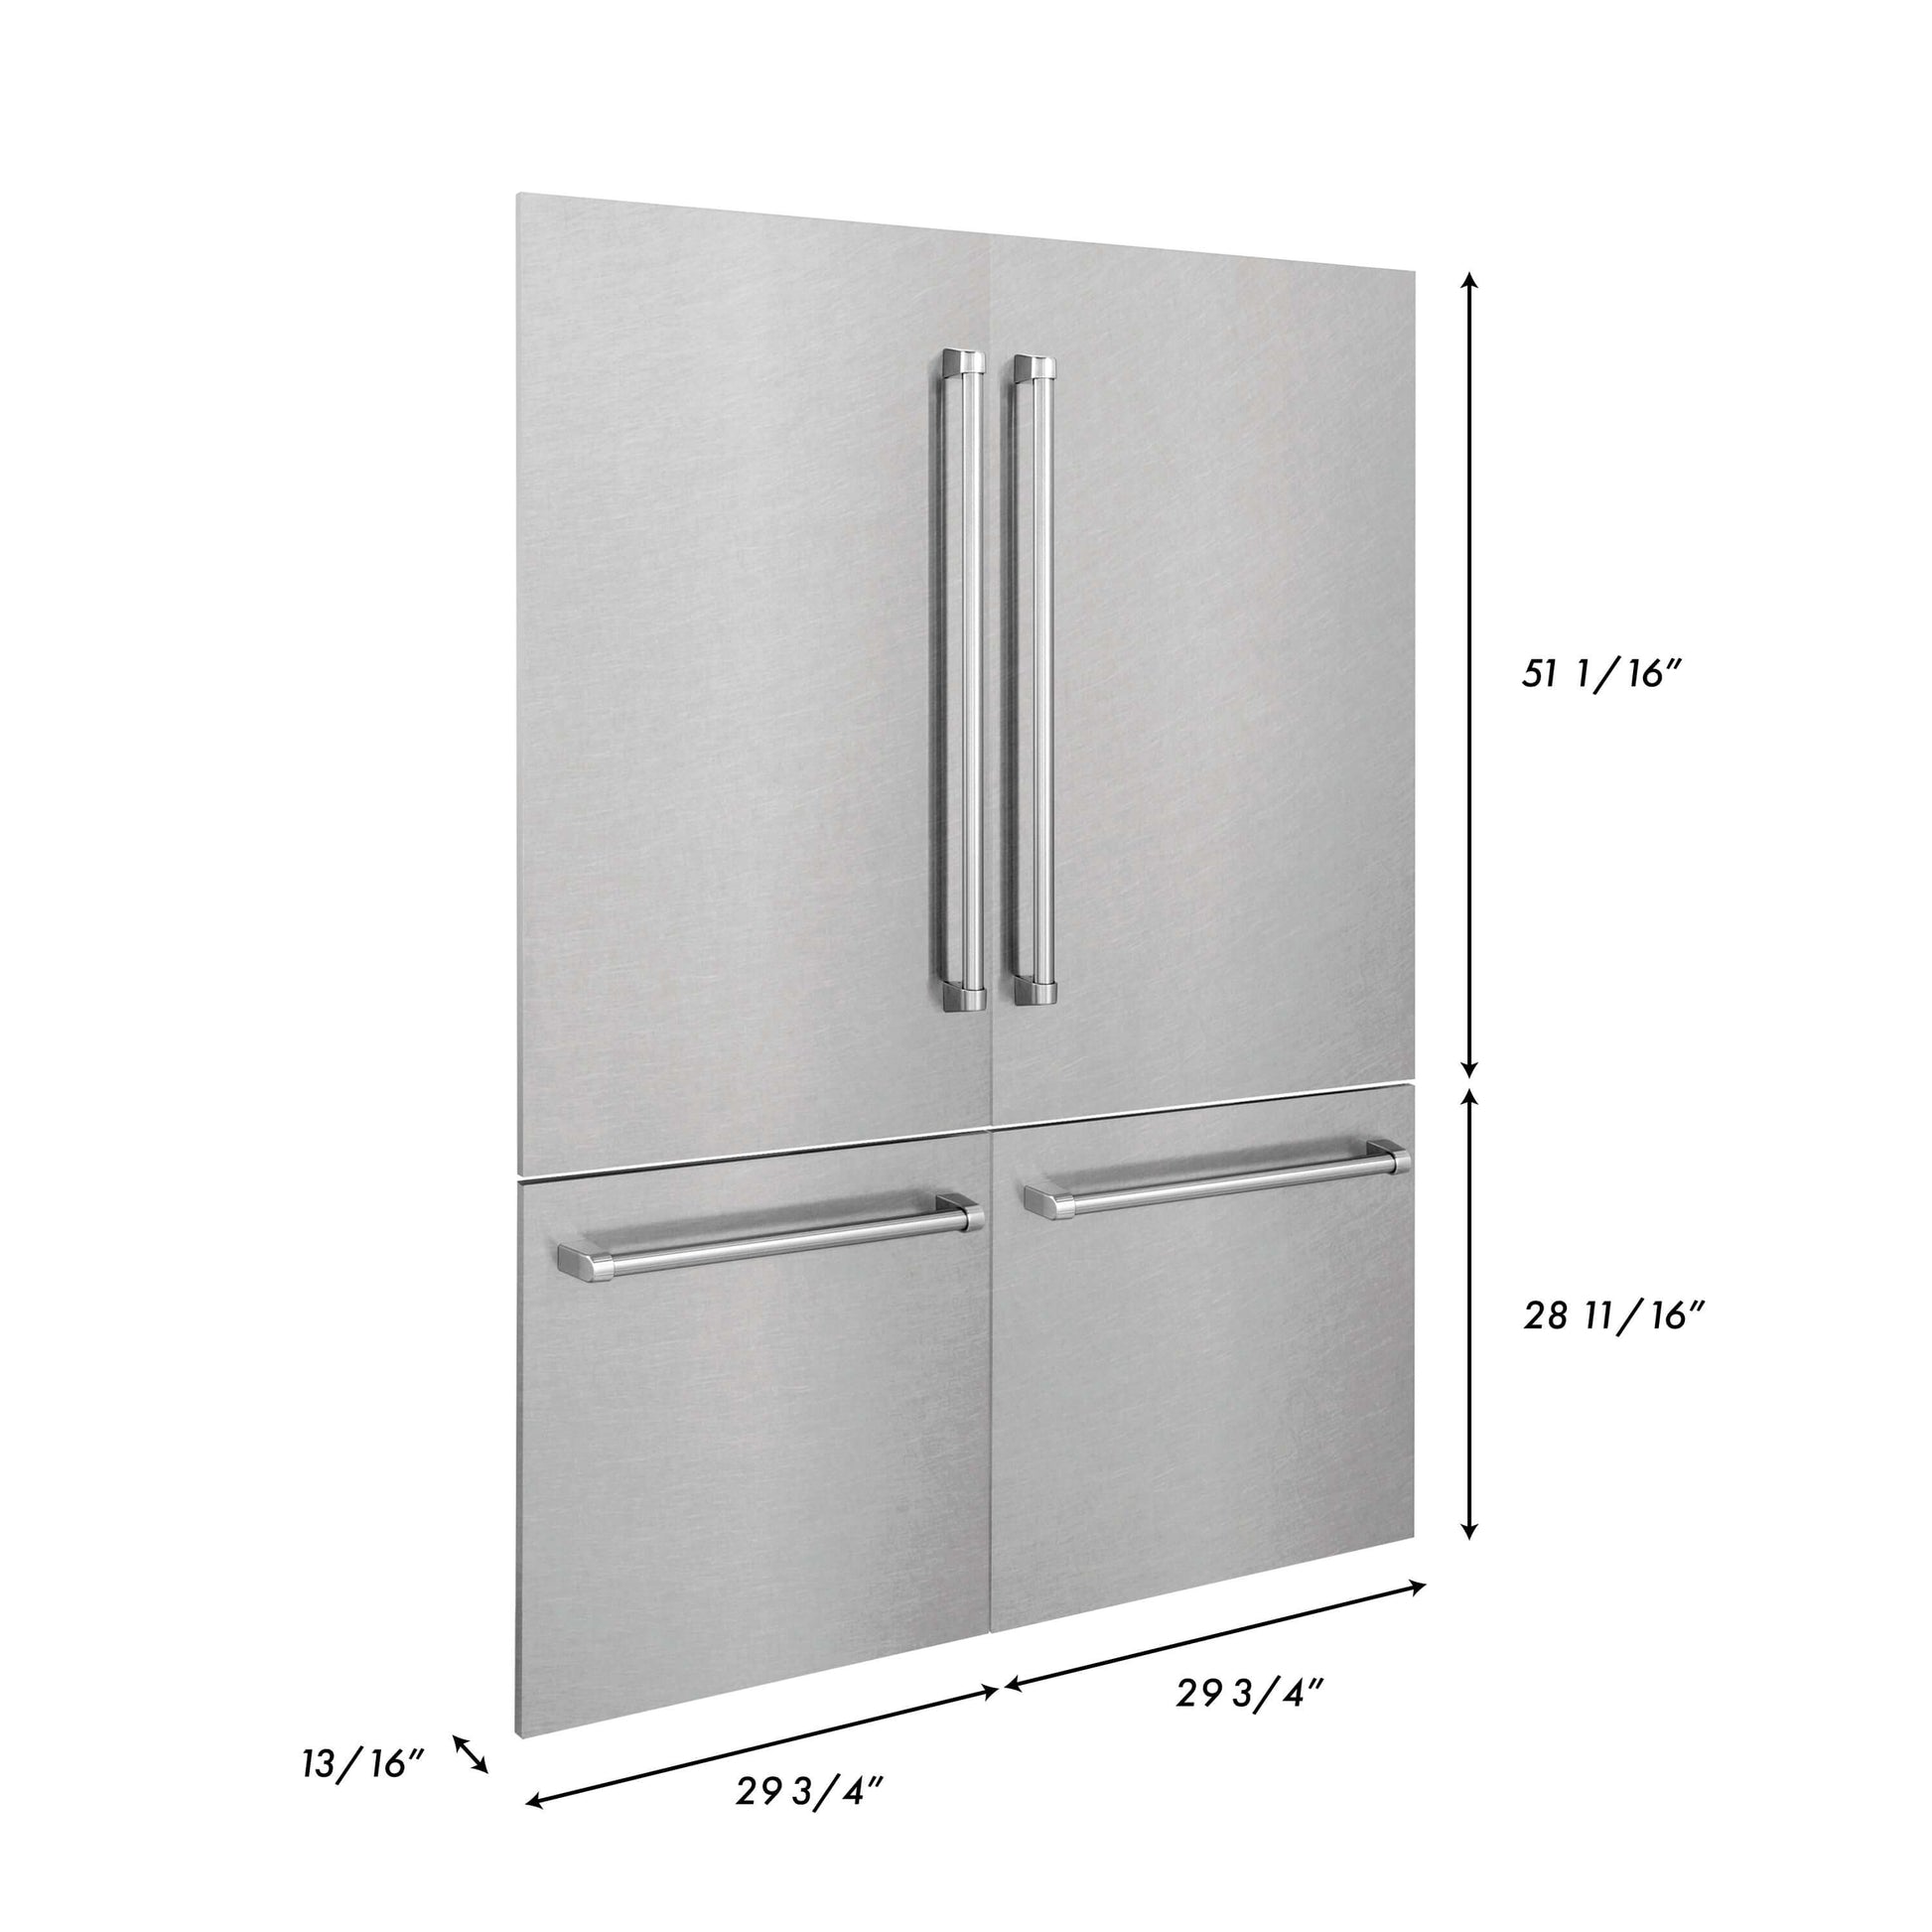 Panels & Handles Only - ZLINE 60" Refrigerator Panels in DuraSnow Stainless